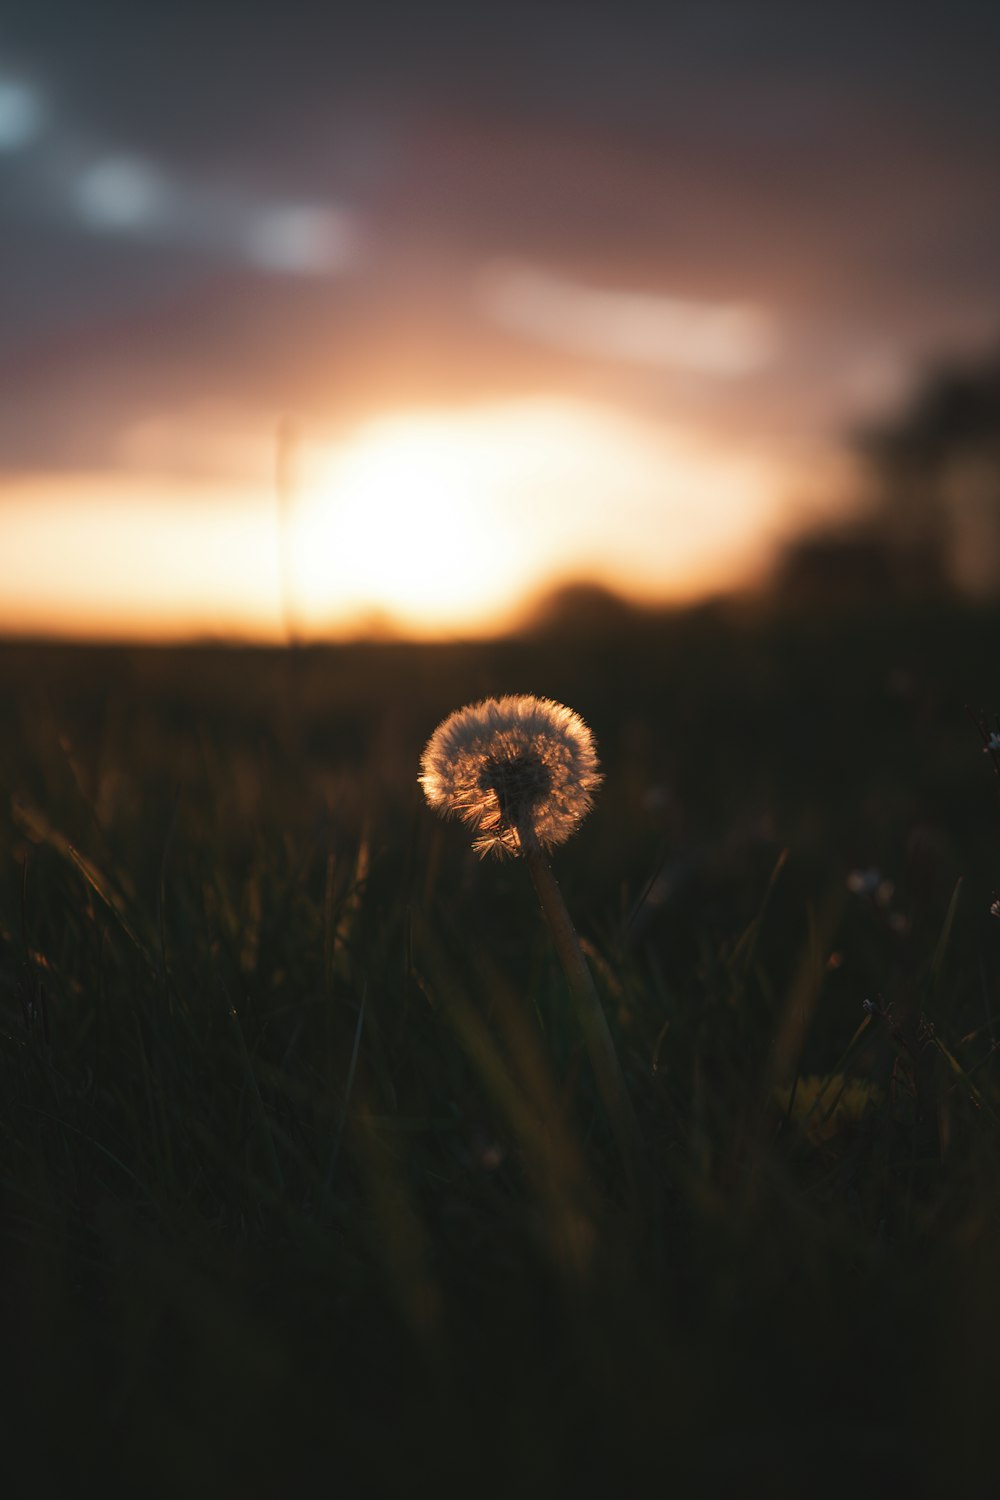 white dandelion in close up photography during sunset